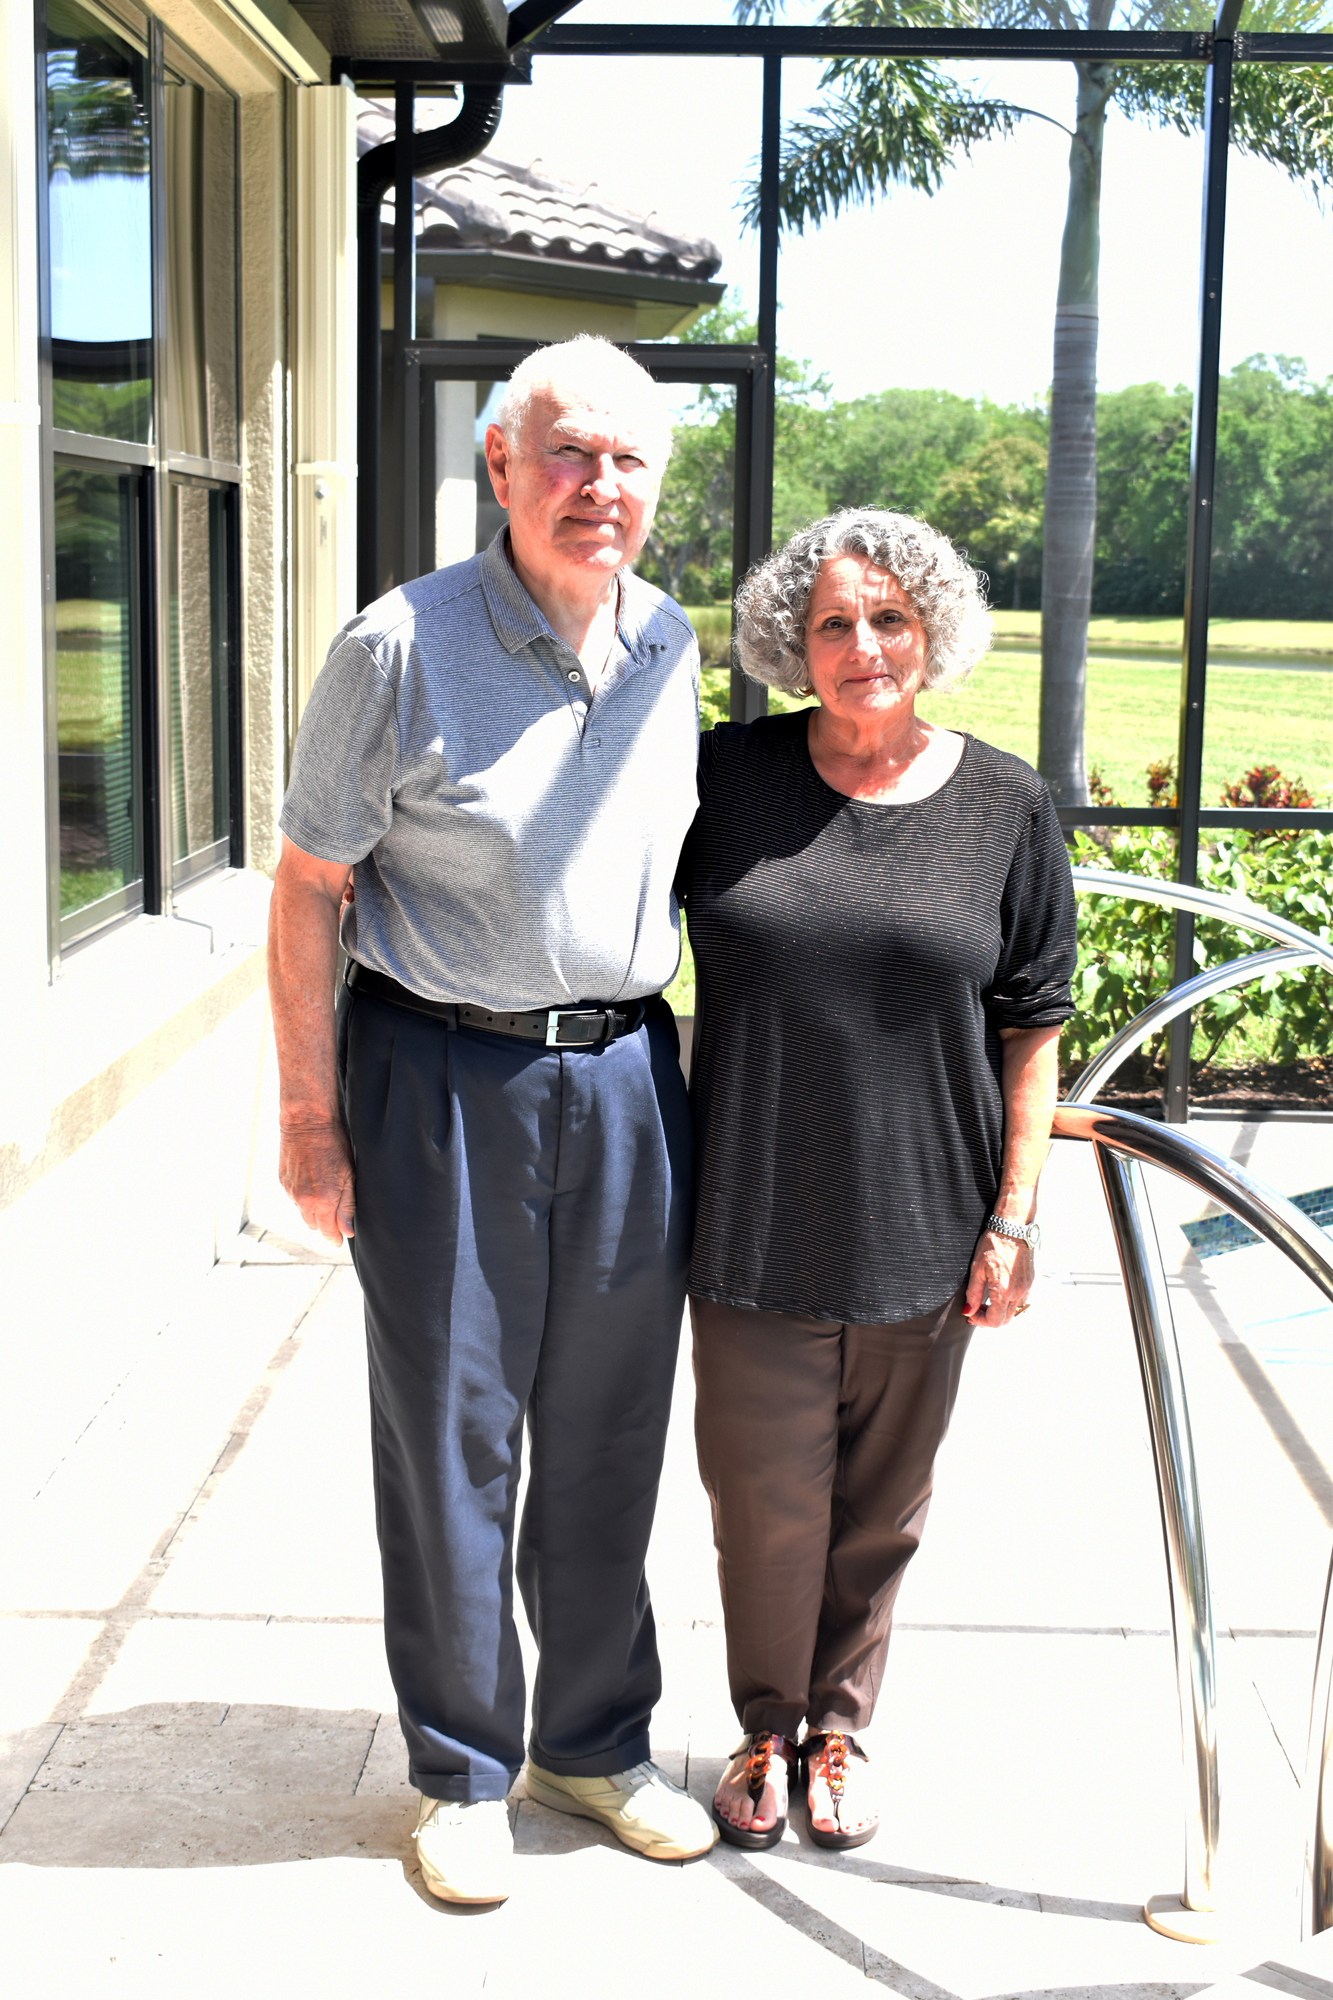 Peter and Beth Shimlock have gotten used to having to do more together ever since his Parkinson's diagnosis.